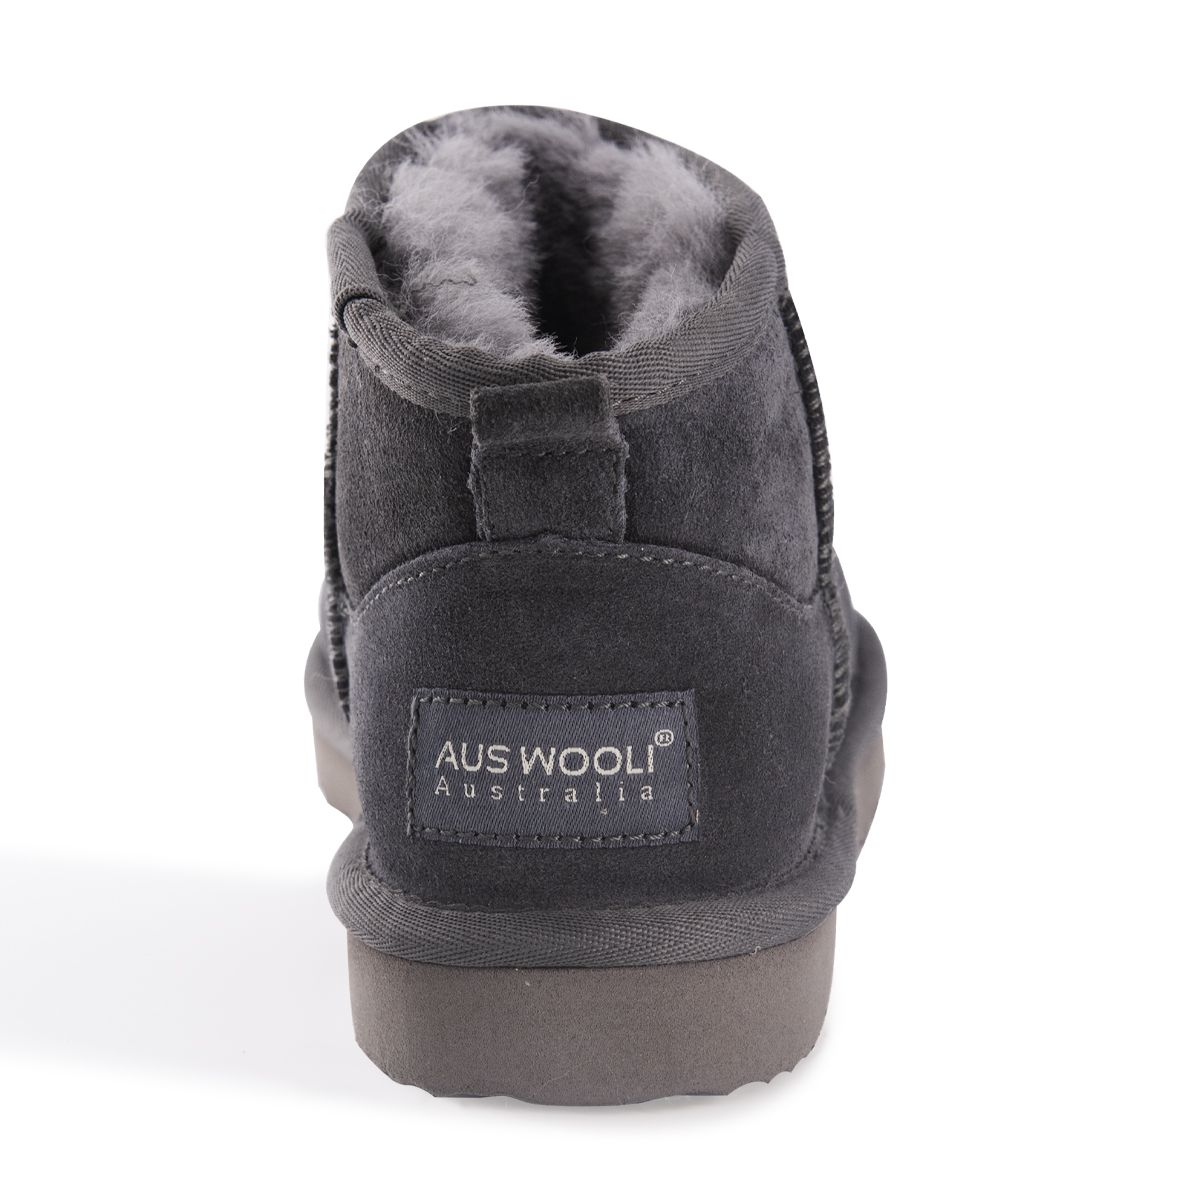 Fashionable mini boot to stay up to date with the latest trends.
 Soft premium genuine Australian Sheepskin wool lining.
 Full leather Suede upper - Water Resistance.
 Unique fully moulded insole with support - all sheepskin lined footbed - extremely comfortable.
 Sustainably sourced and eco-friendly processed.
 Rubber High-density EVA blend outsole - making it lighter, softer and more durable.
 Double stitching and reinforced heel.
 Sheepskin breathes allowing feet to stay warm in winter and cool in summer.